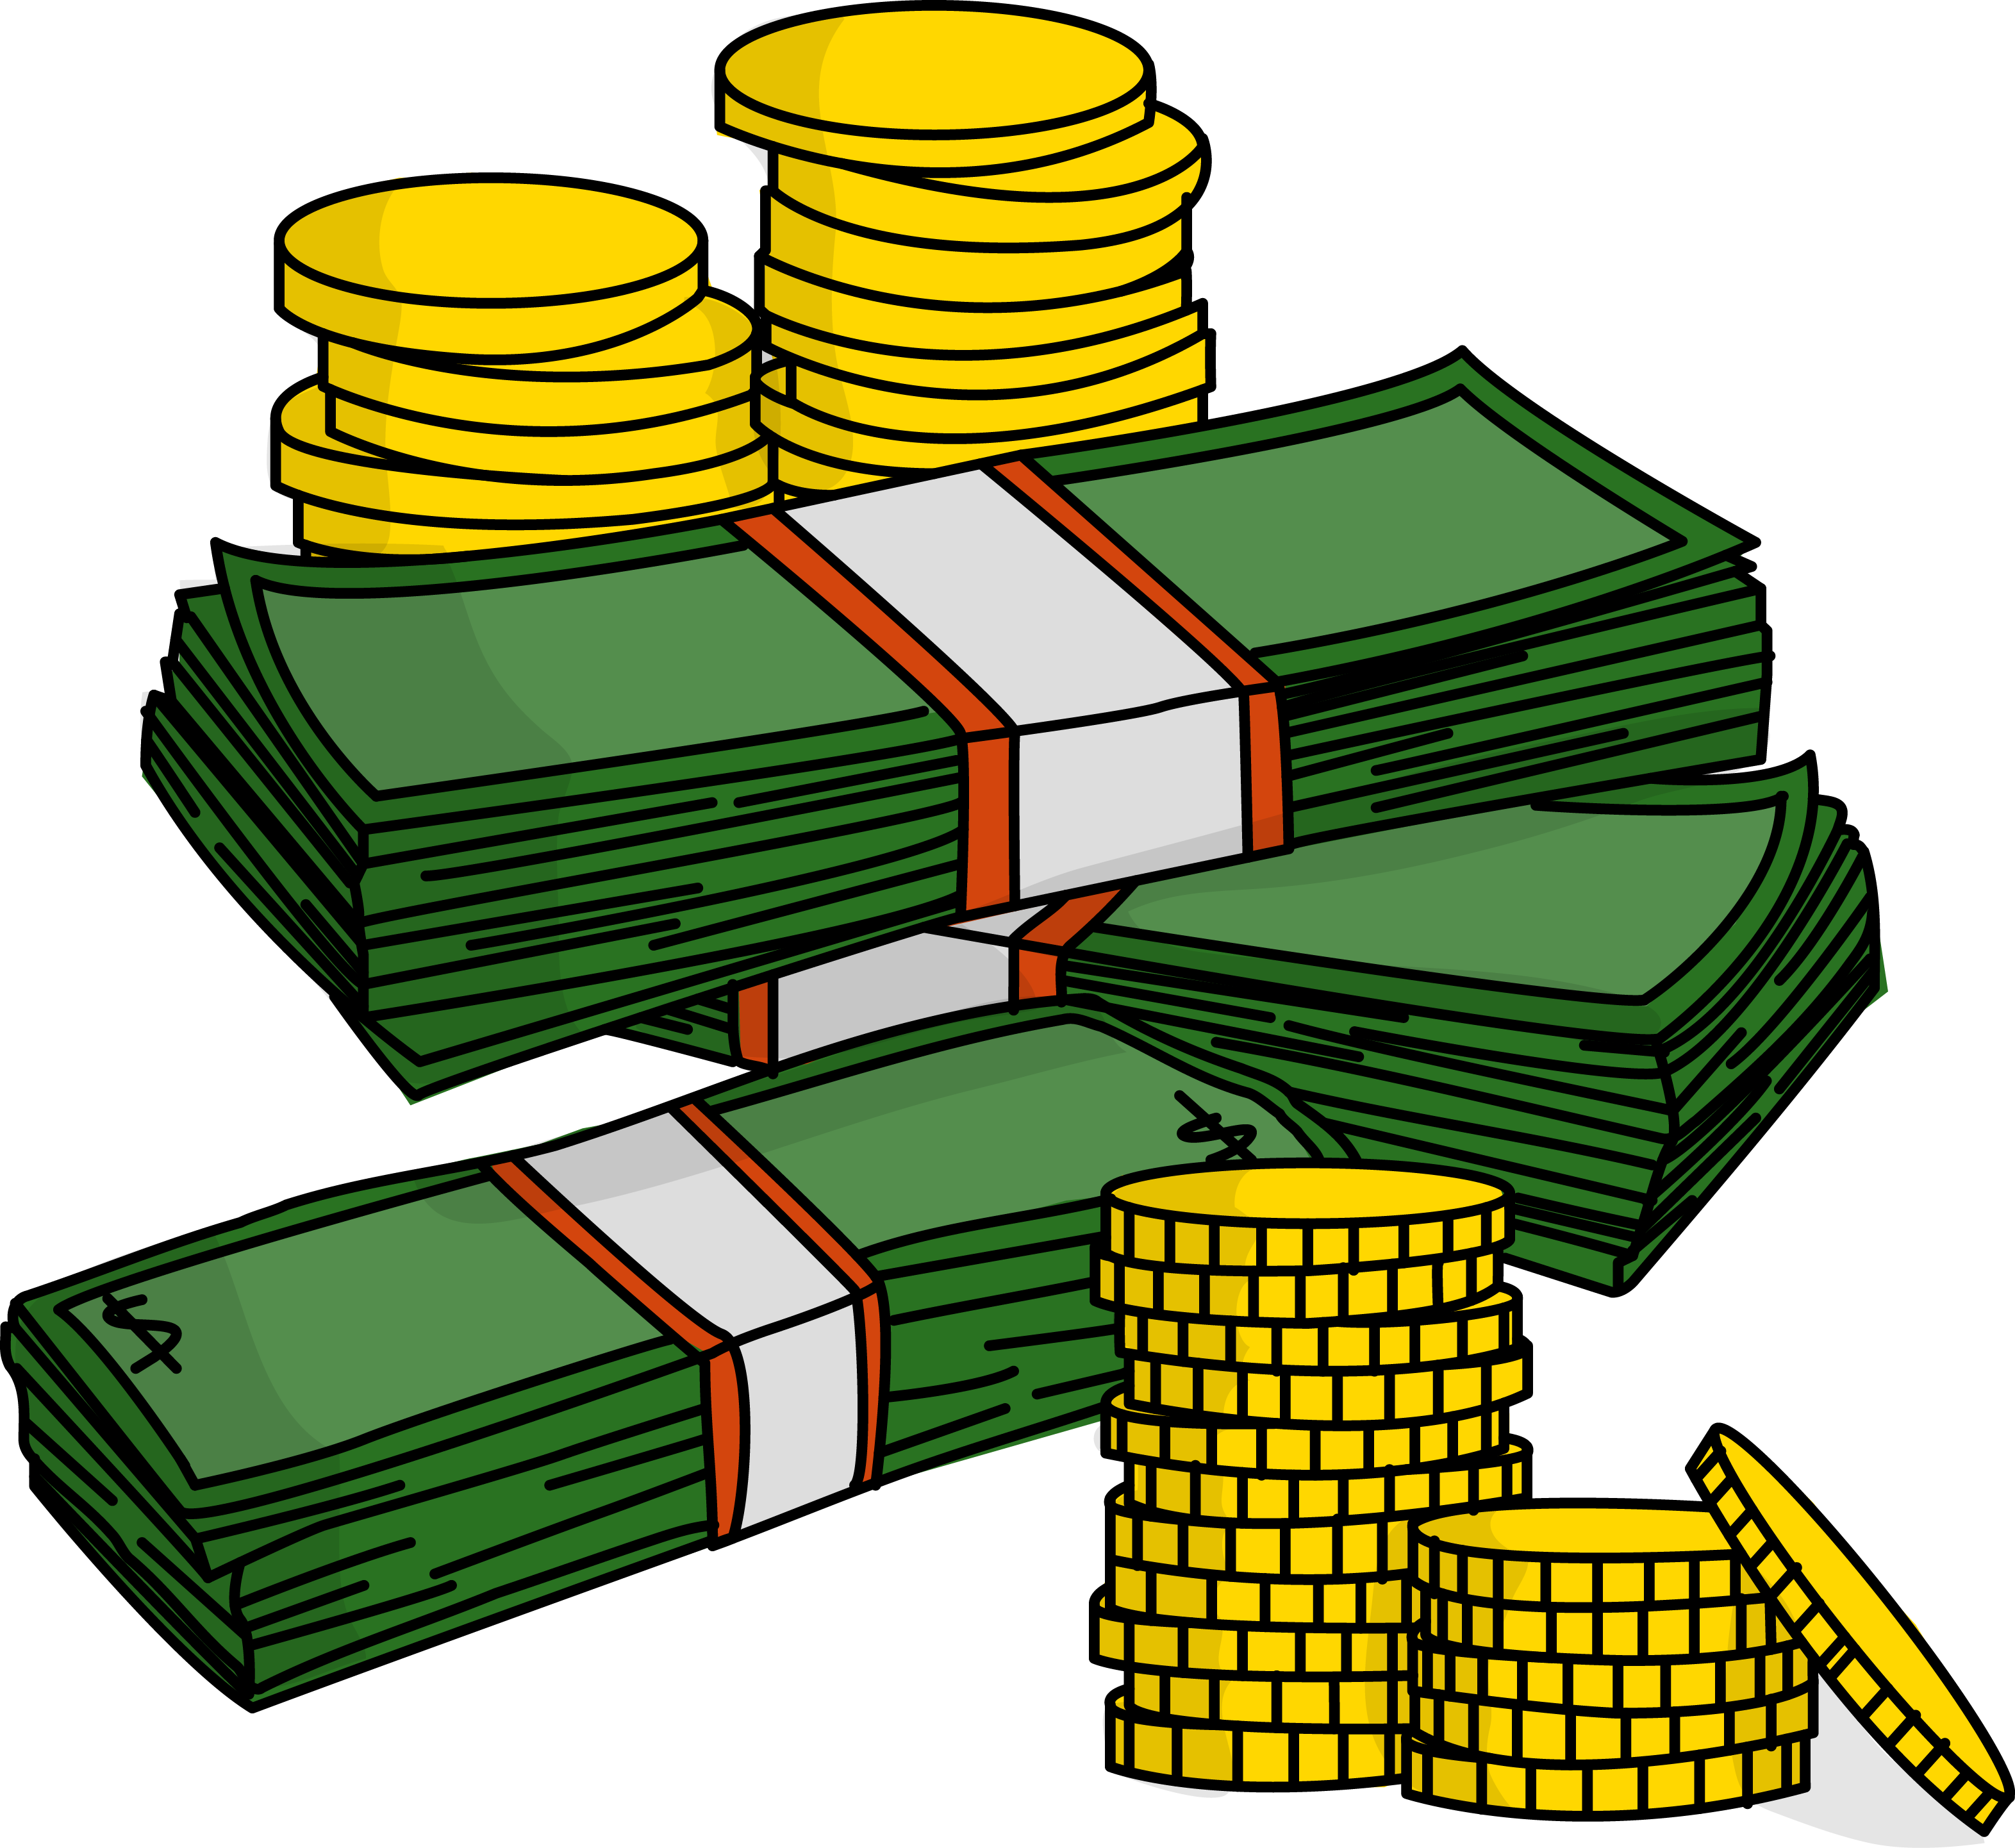 clipart of money images - photo #21